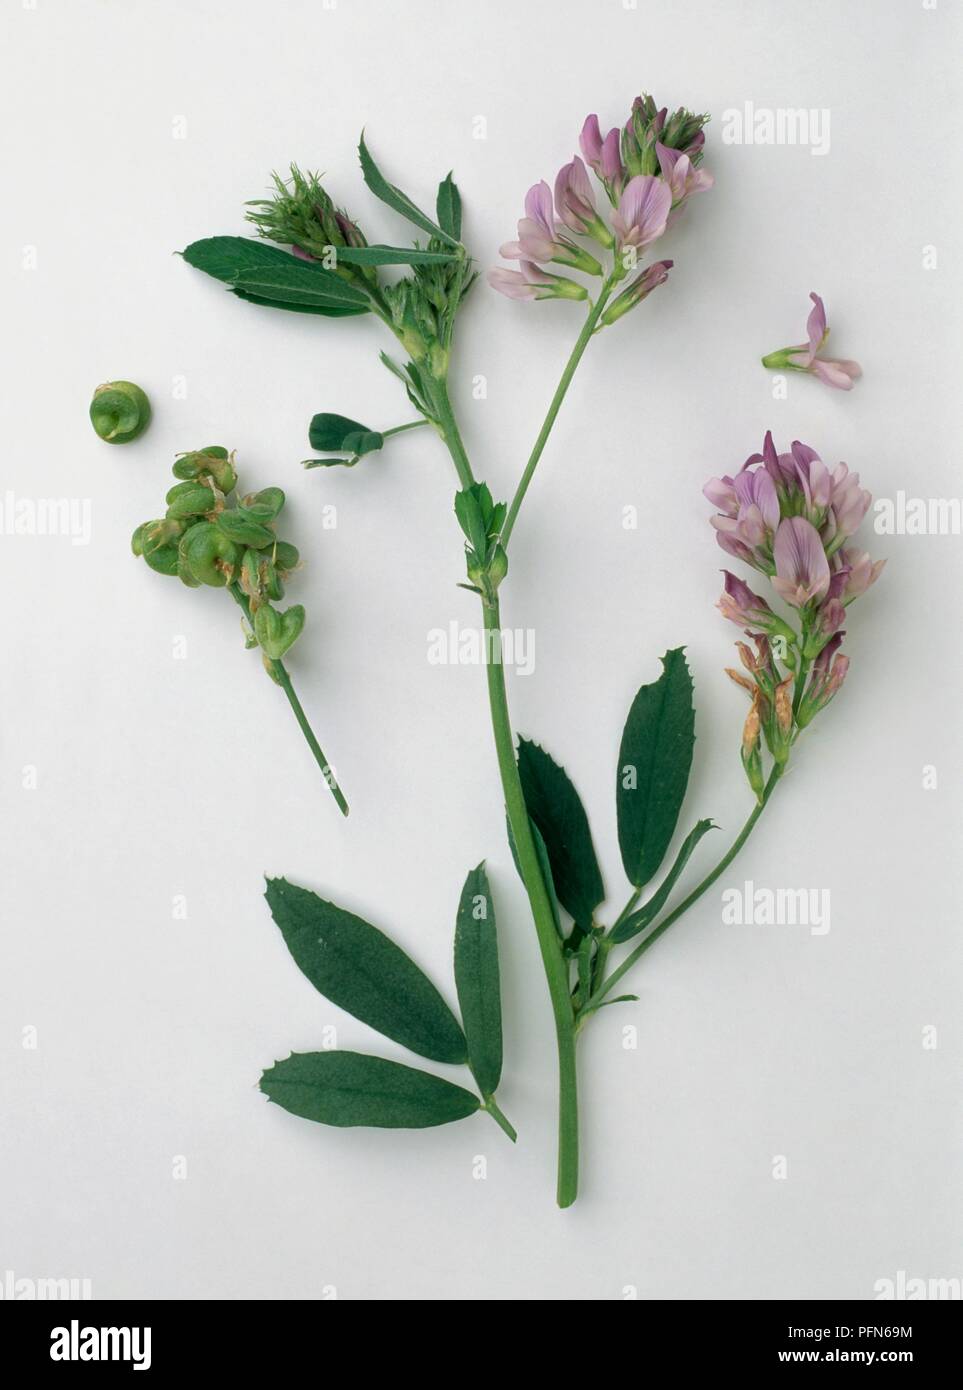 Medicago sativa (Lucerne), stem with racemes of lilac flowers, leaves, and fruit-pods Stock Photo